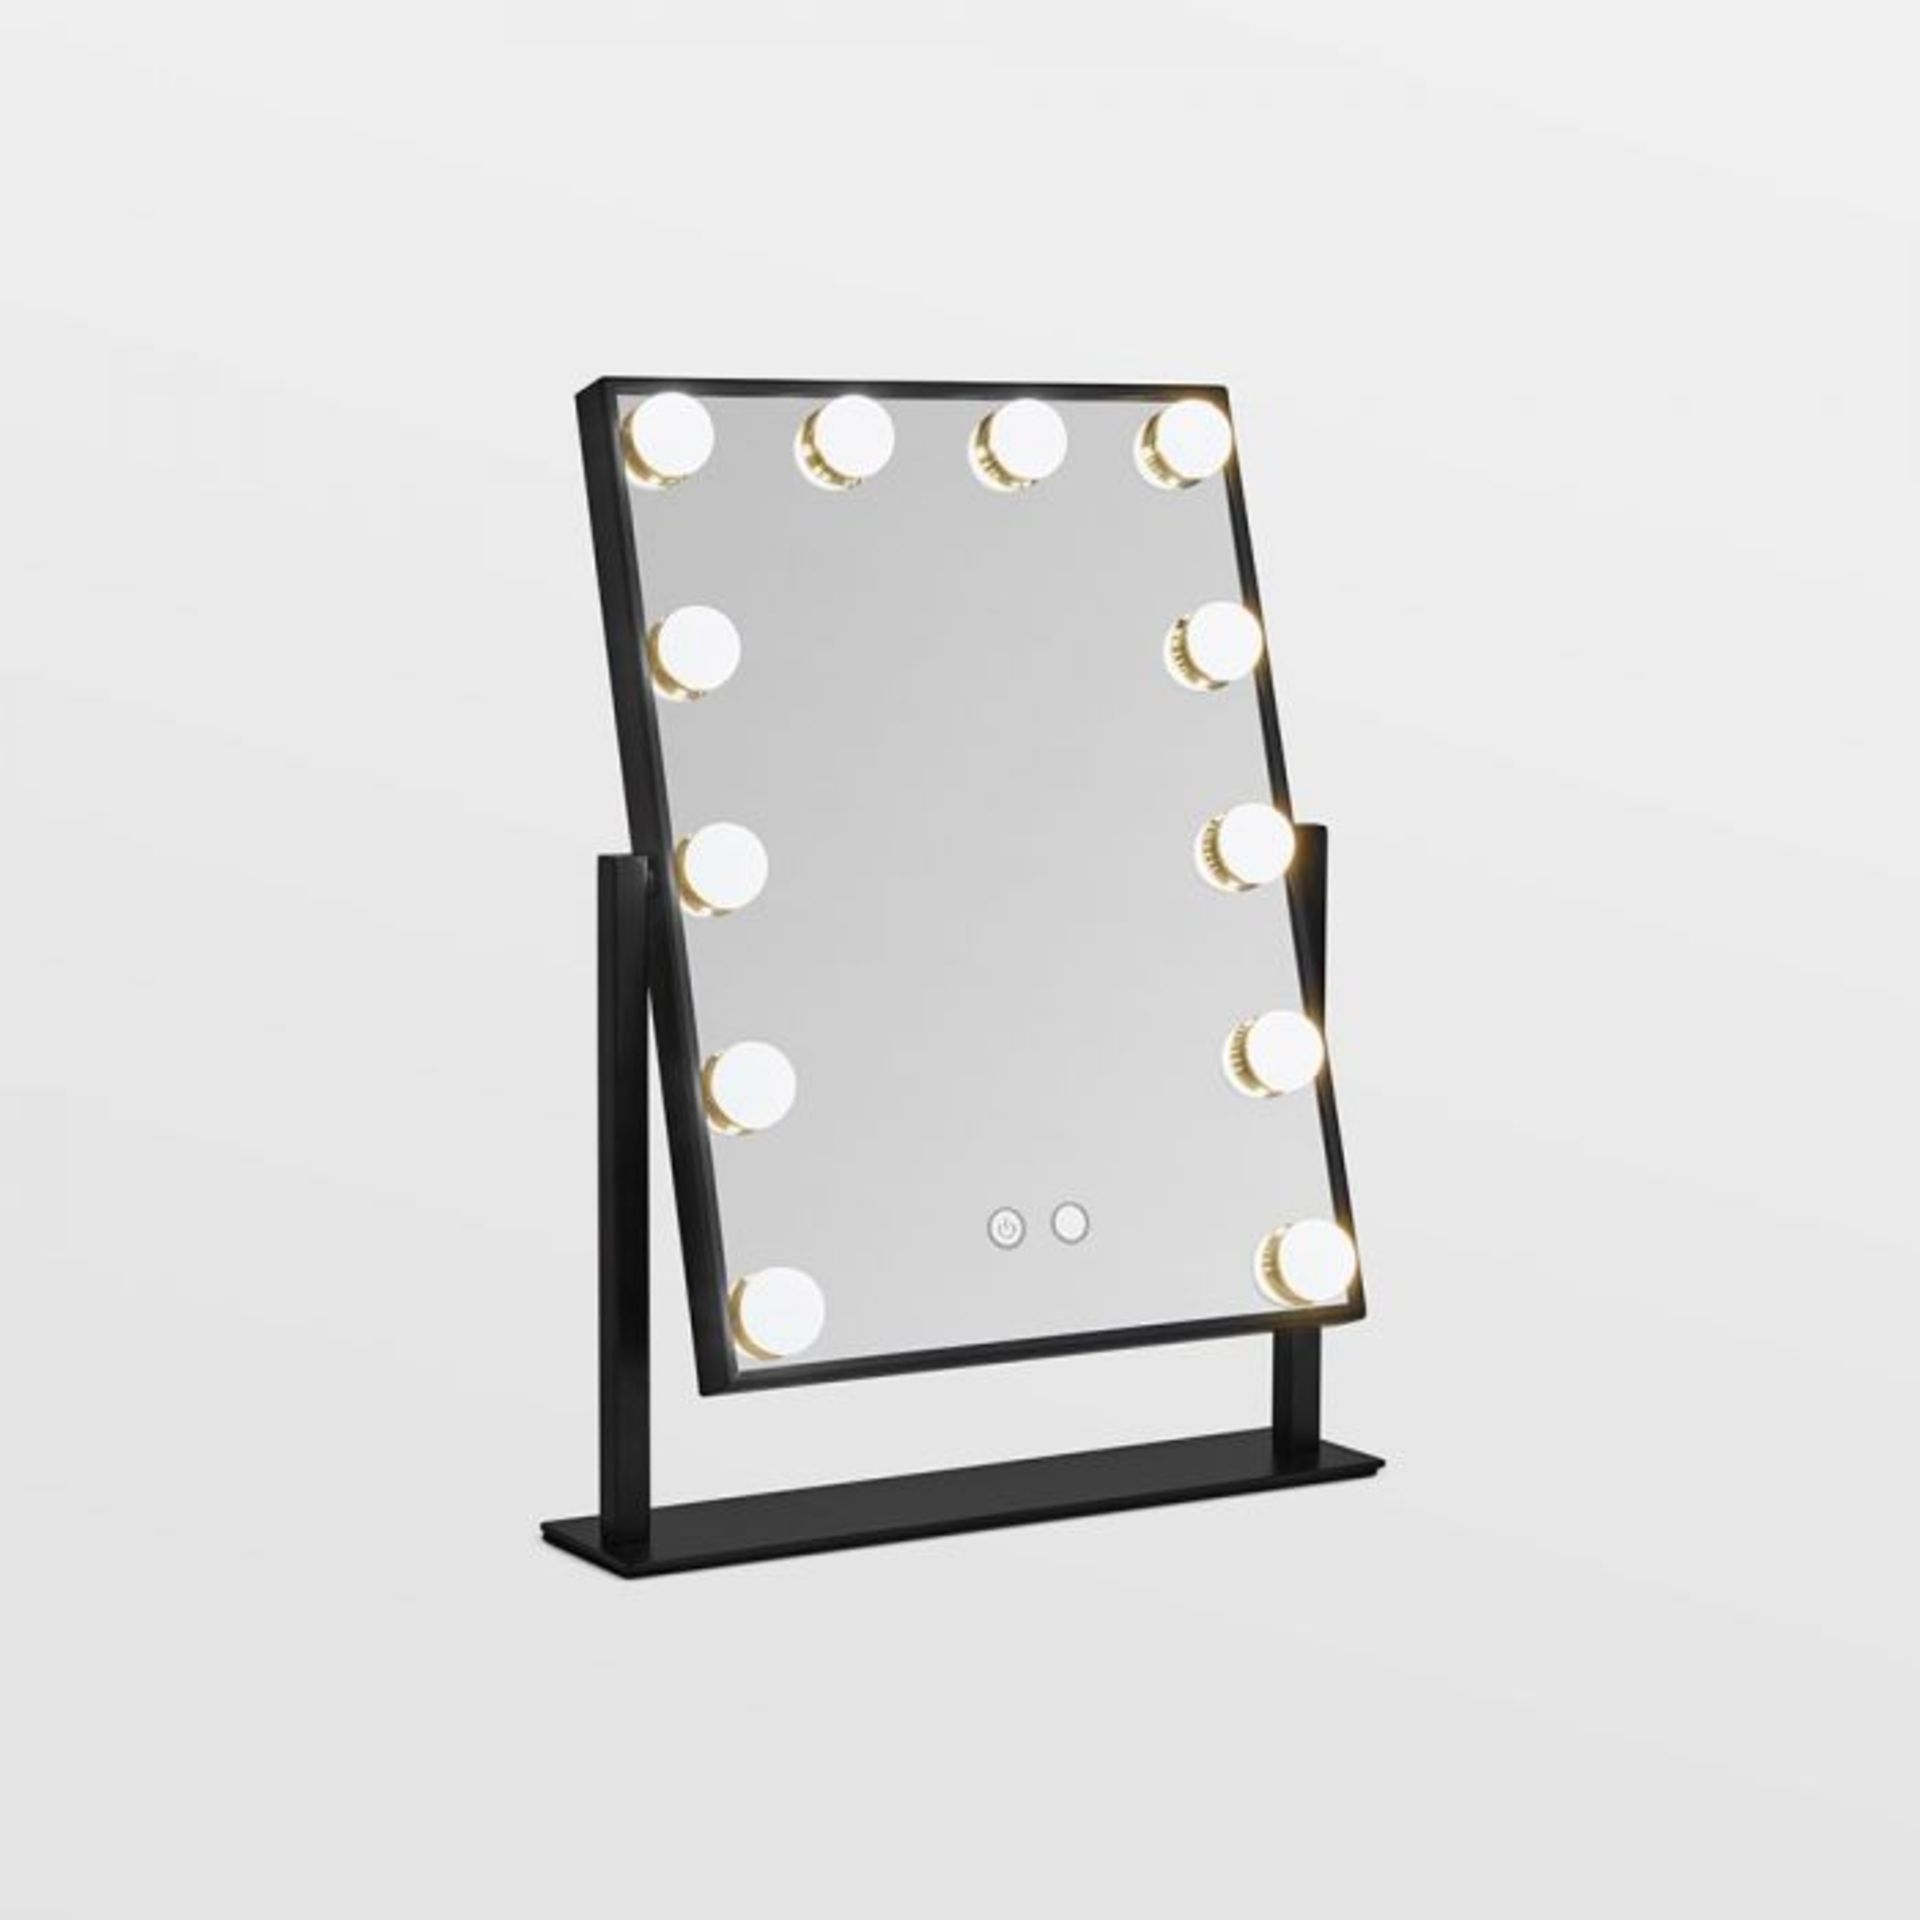 12 Bulb LED Mirror. This gorgeous Hollywood mirror from Beautify will make your dressing room the